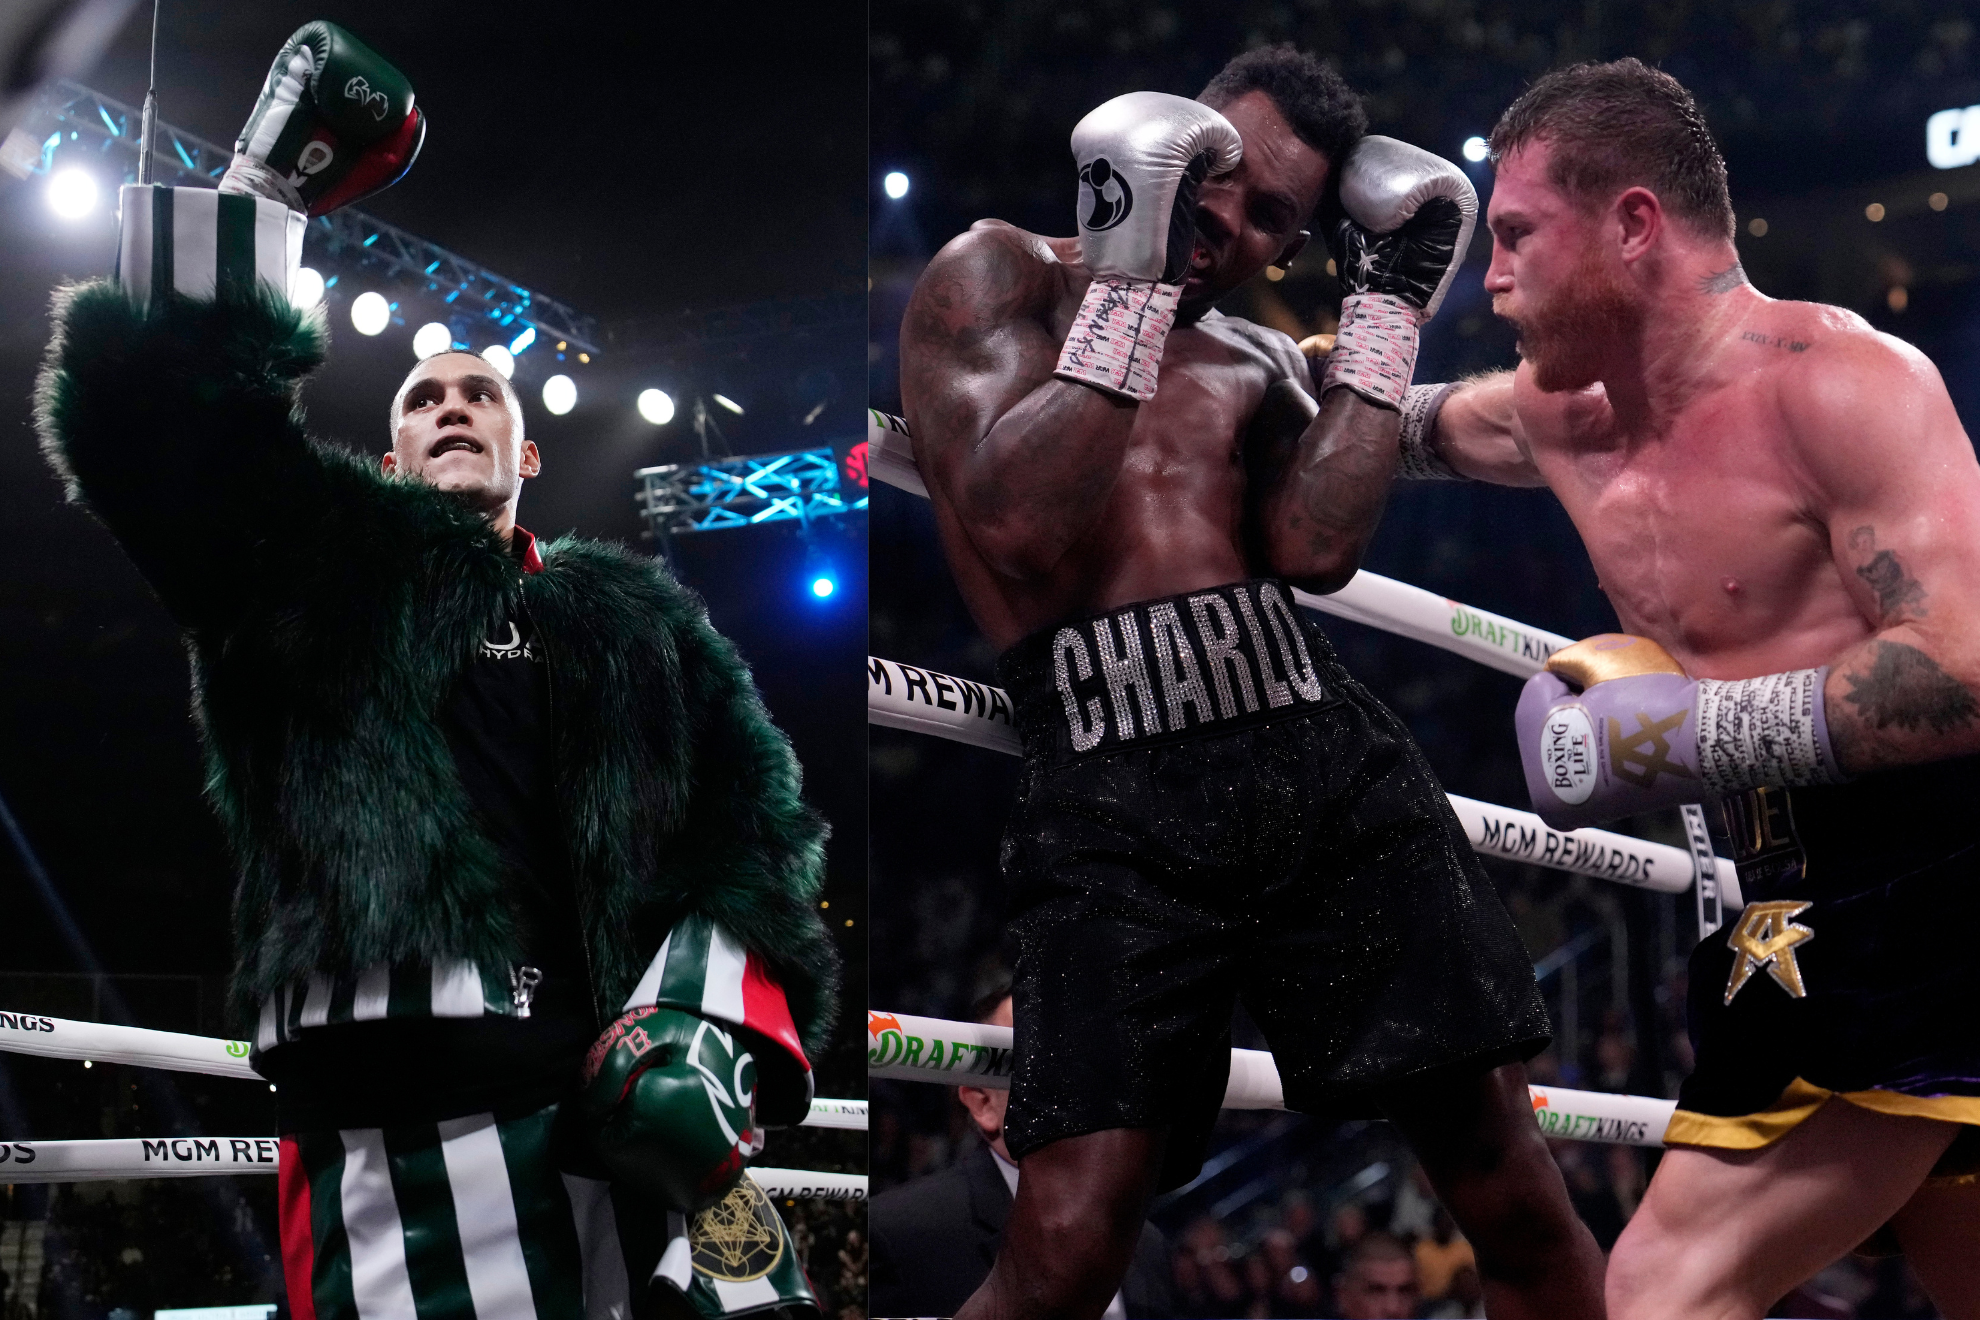 Canelo is likely to fight the second Charlo brother before Benavidez.